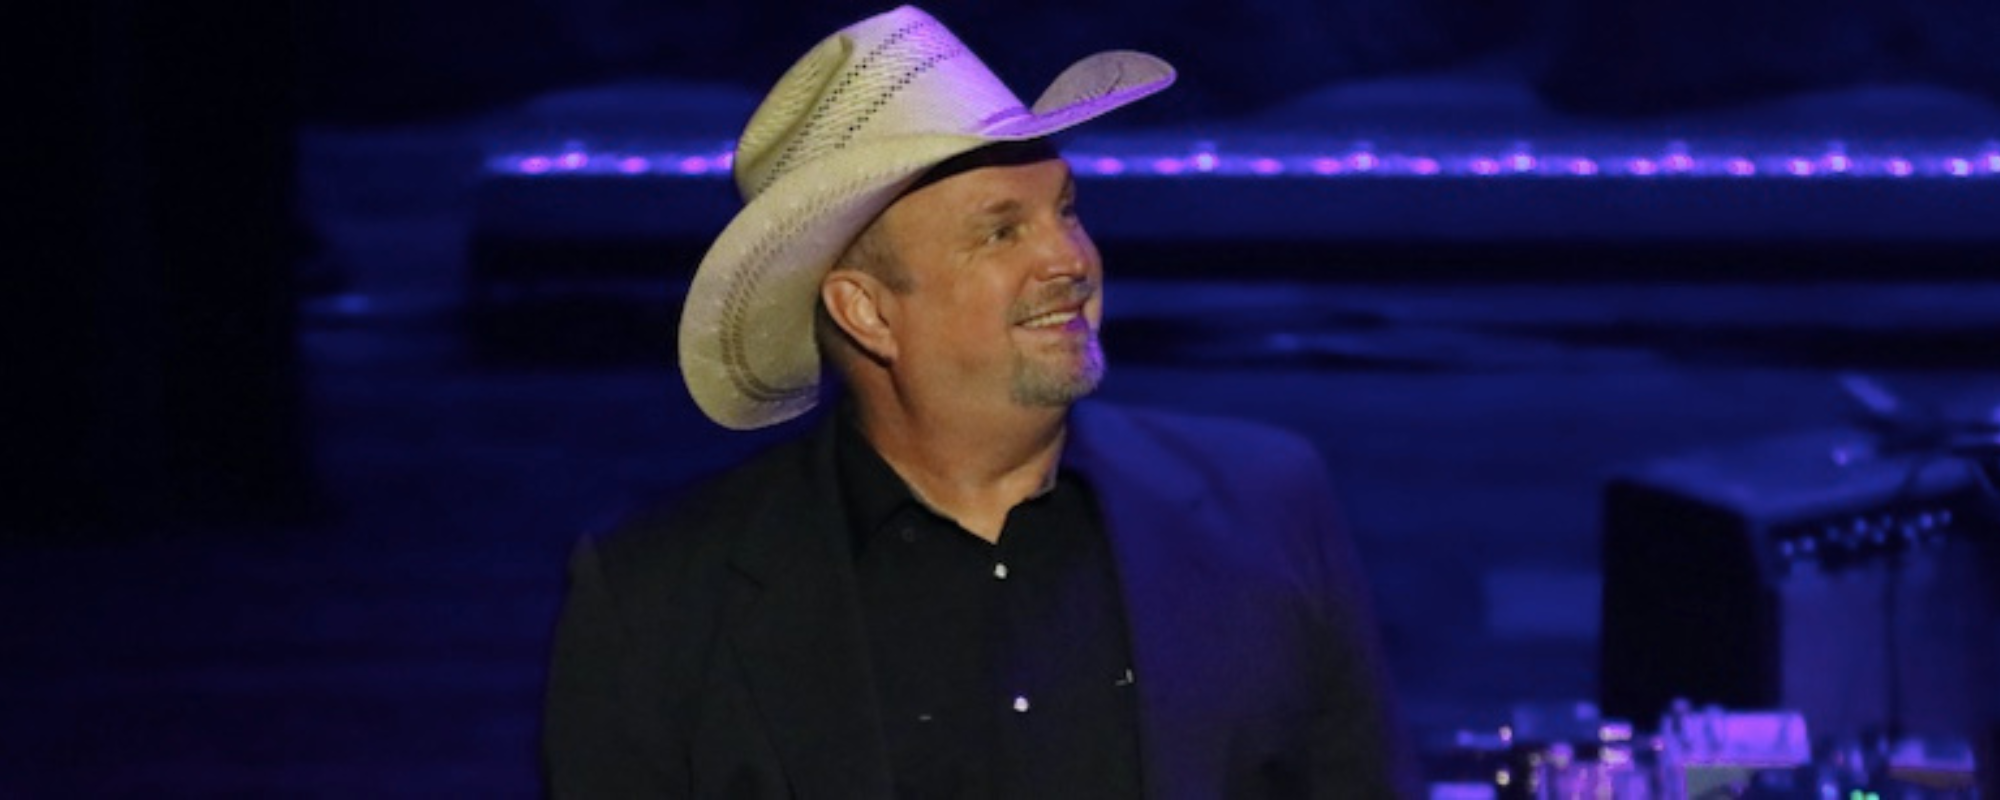 Garth Brooks Teams with Ronnie Dunn for '90s Country Throwback Track "Rodeo Man" from His New Album 'Time Traveler'